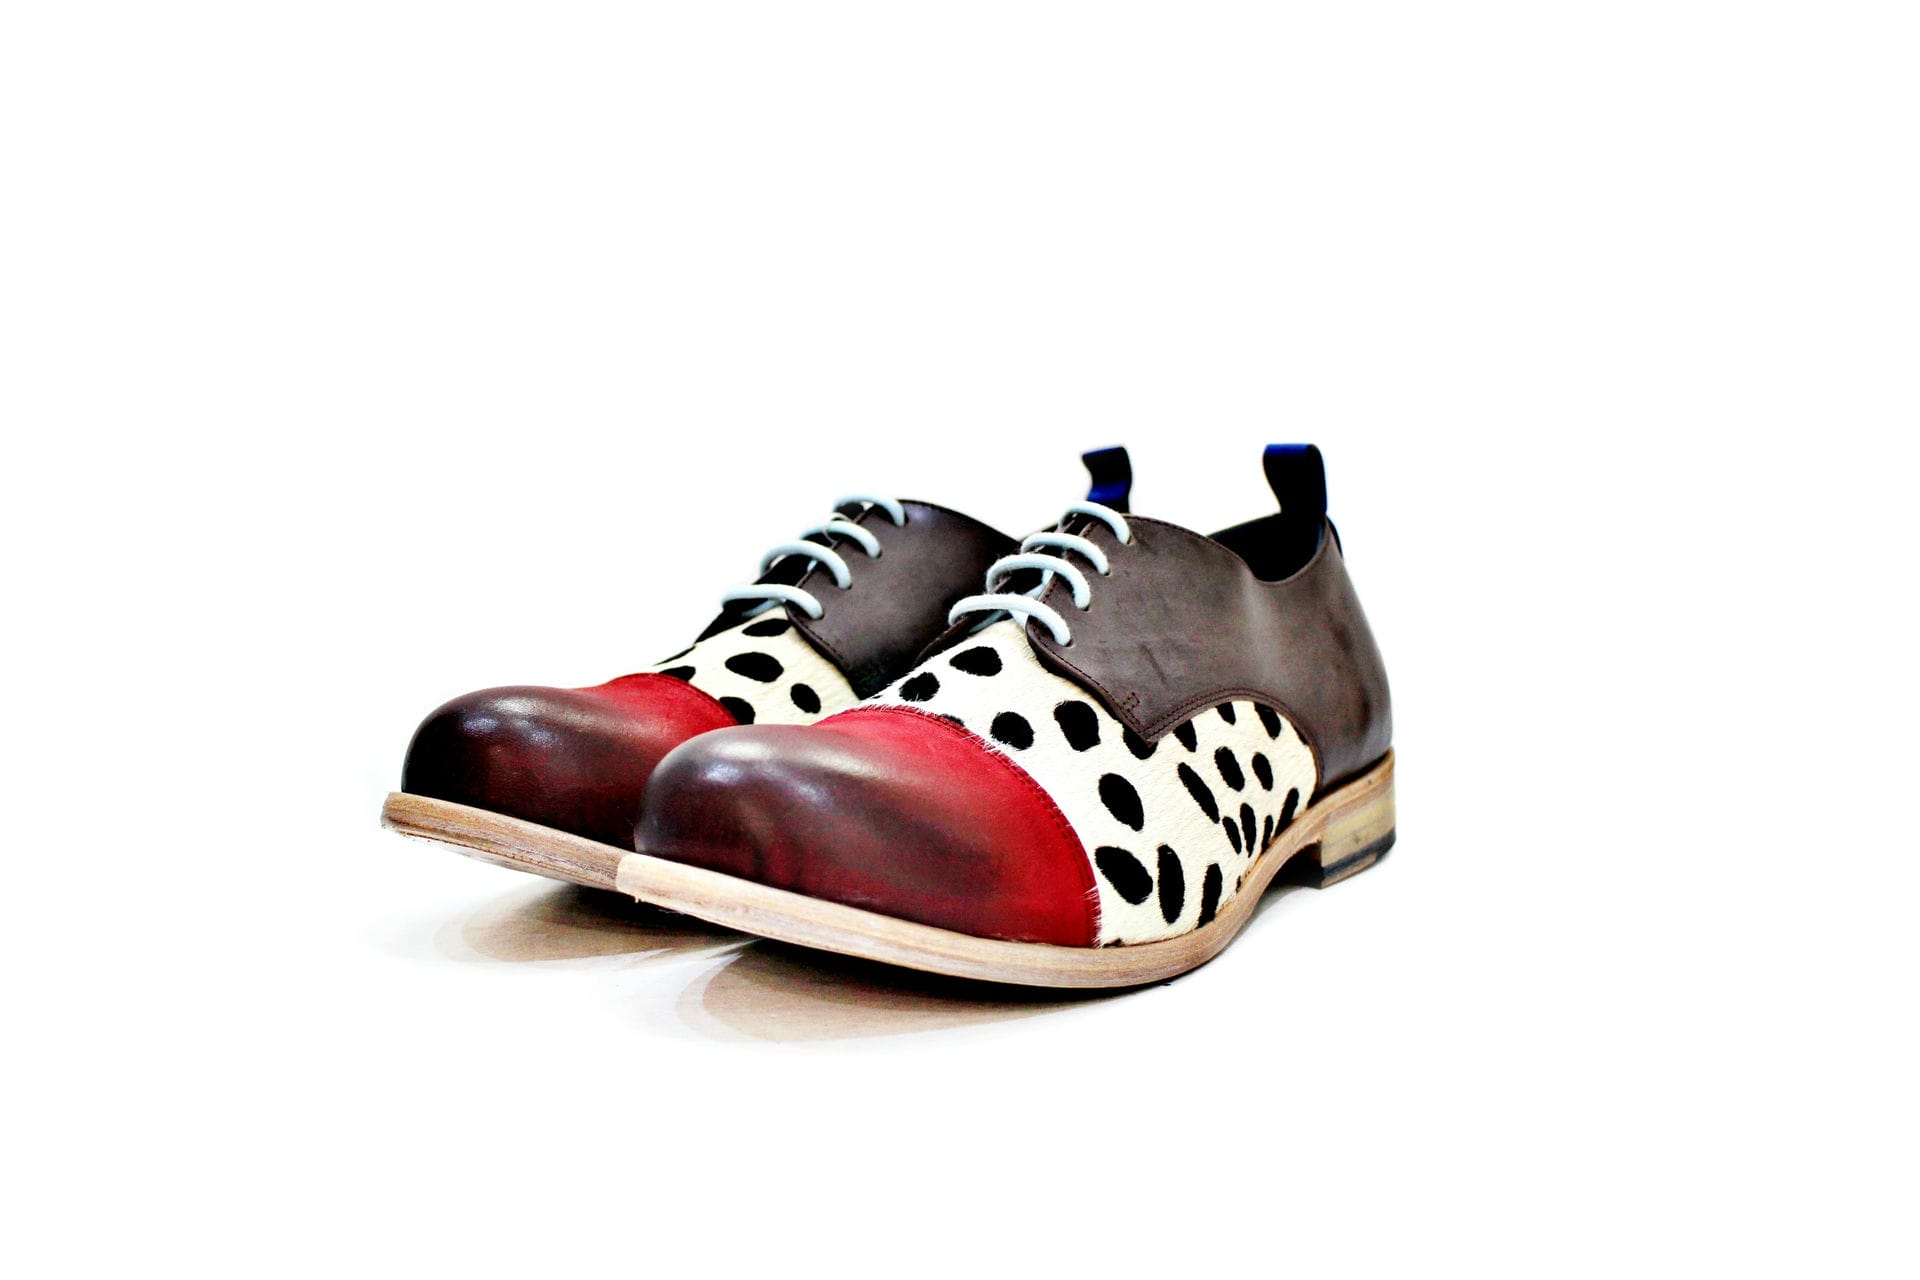 Shoe consisting of hair and leather, leather lining with leather sole. Handmade in Portugal “Walk with Pintta